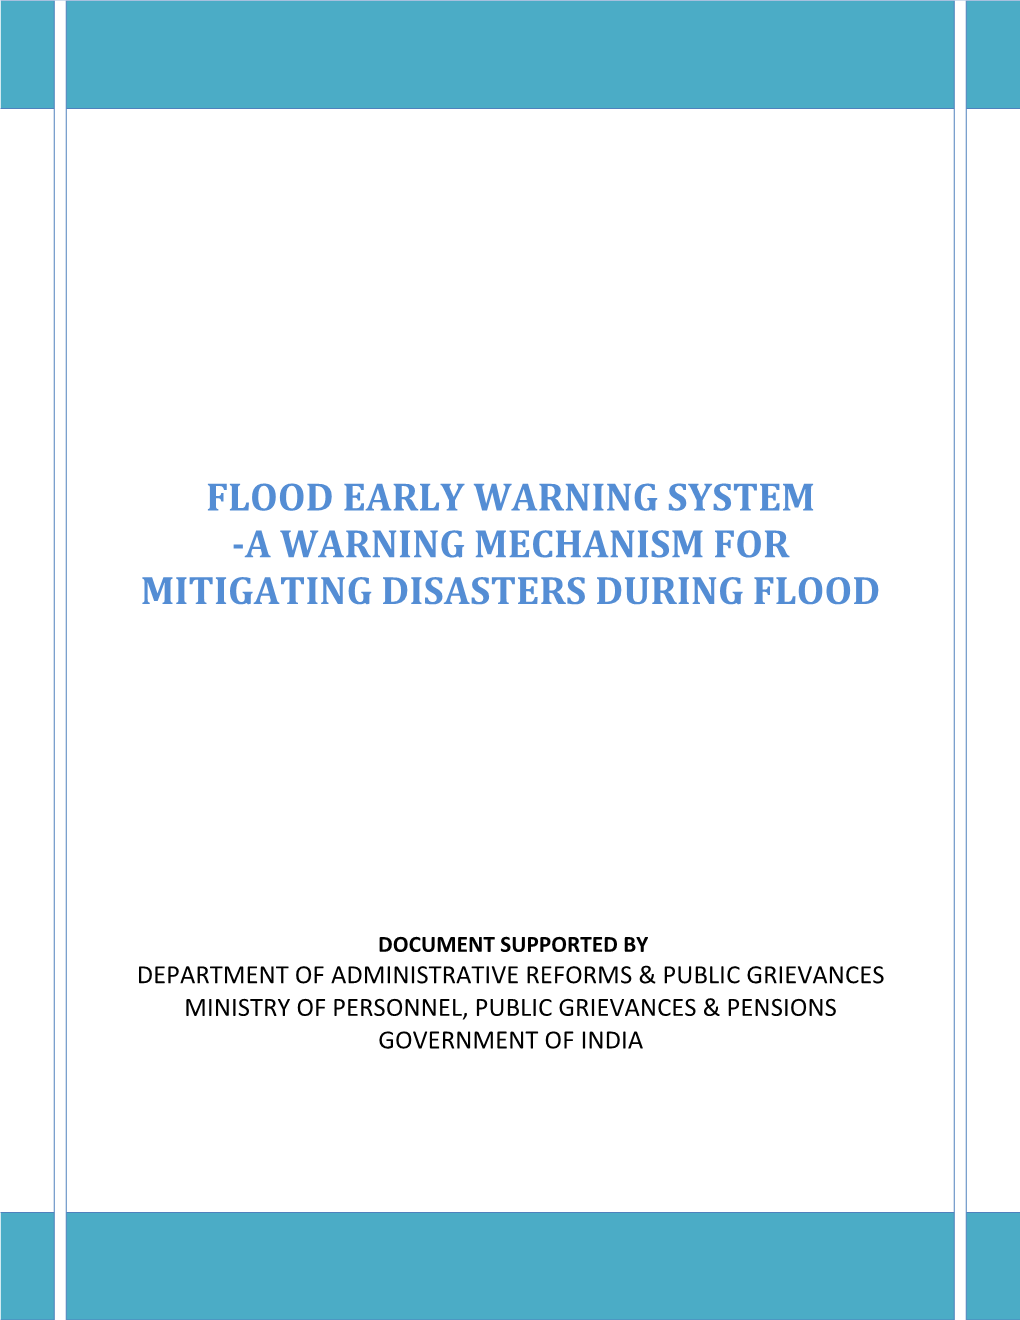 Flood Early Warning System -A Warning Mechanism for Mitigating Disasters During Flood